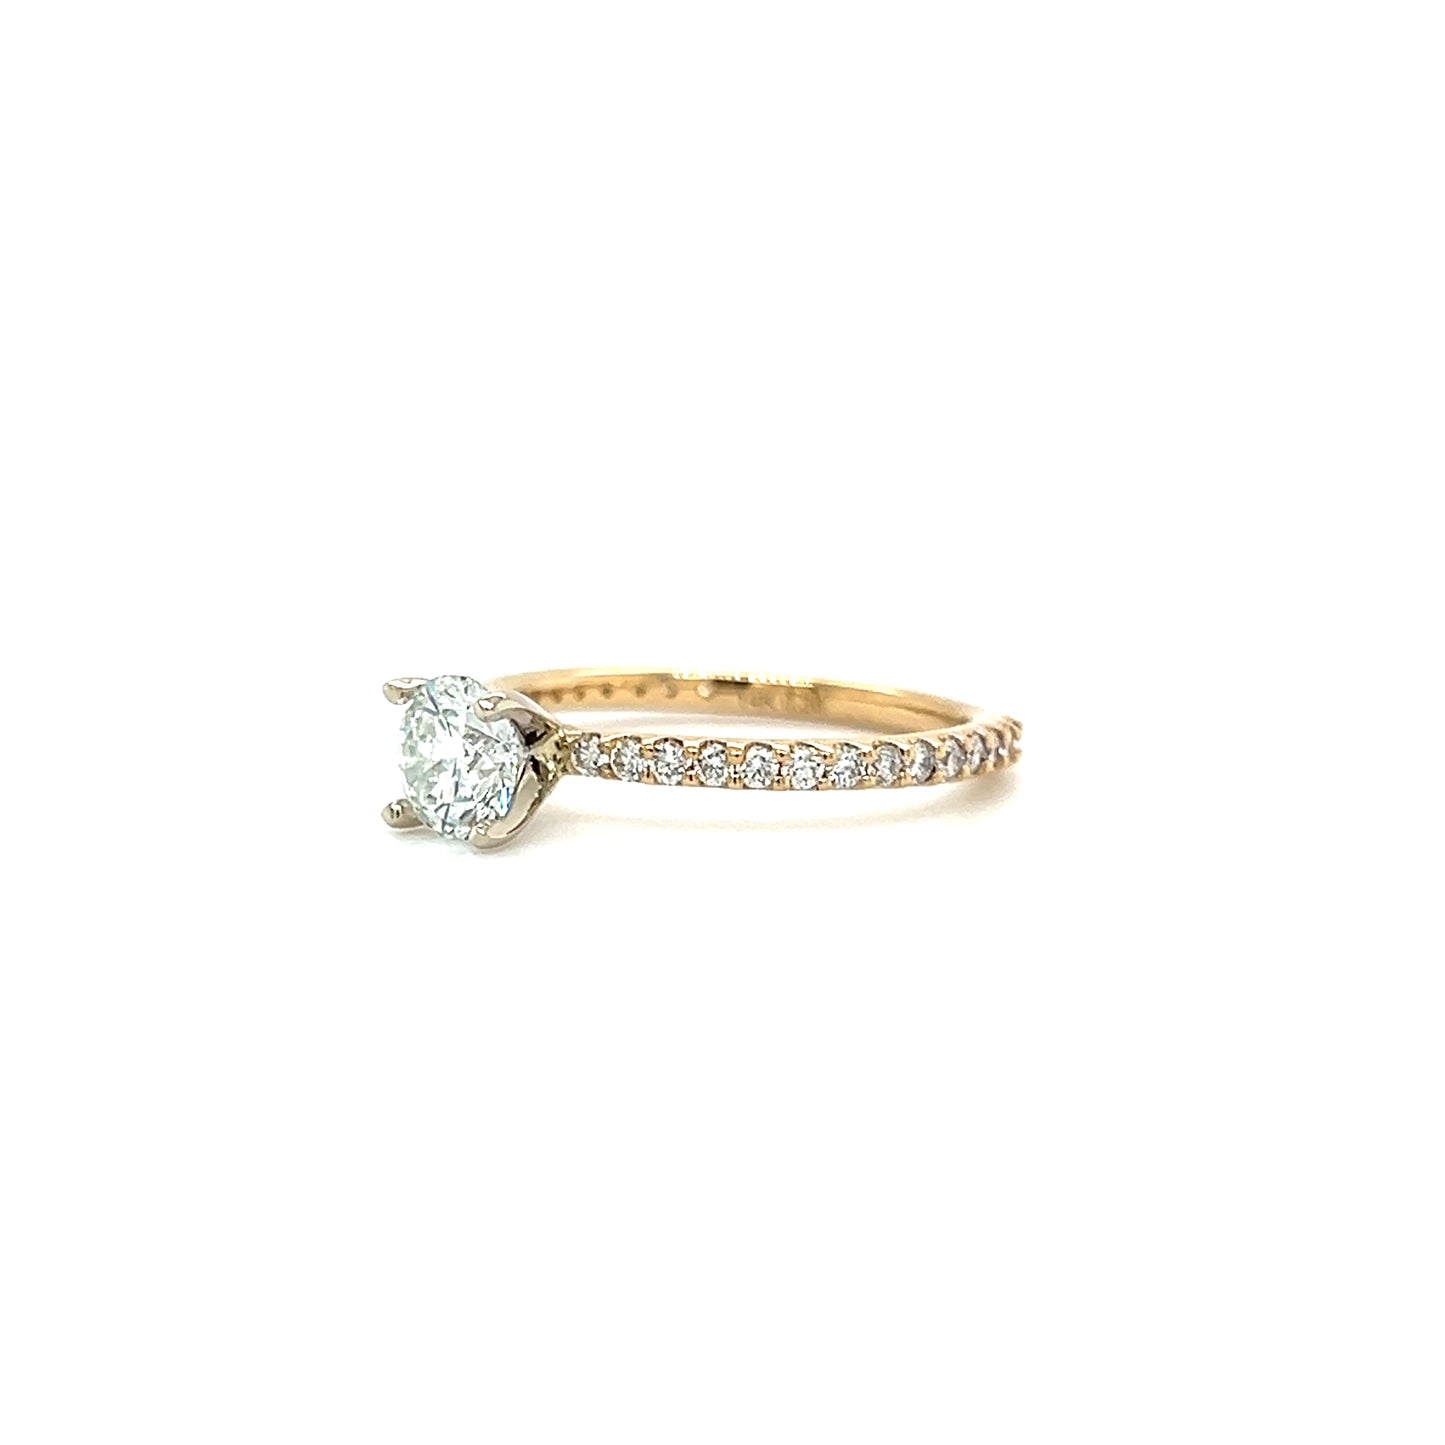 Solitaire Diamond Ring with 1.06ctw of Diamonds in 14K Yellow Gold Right Side View